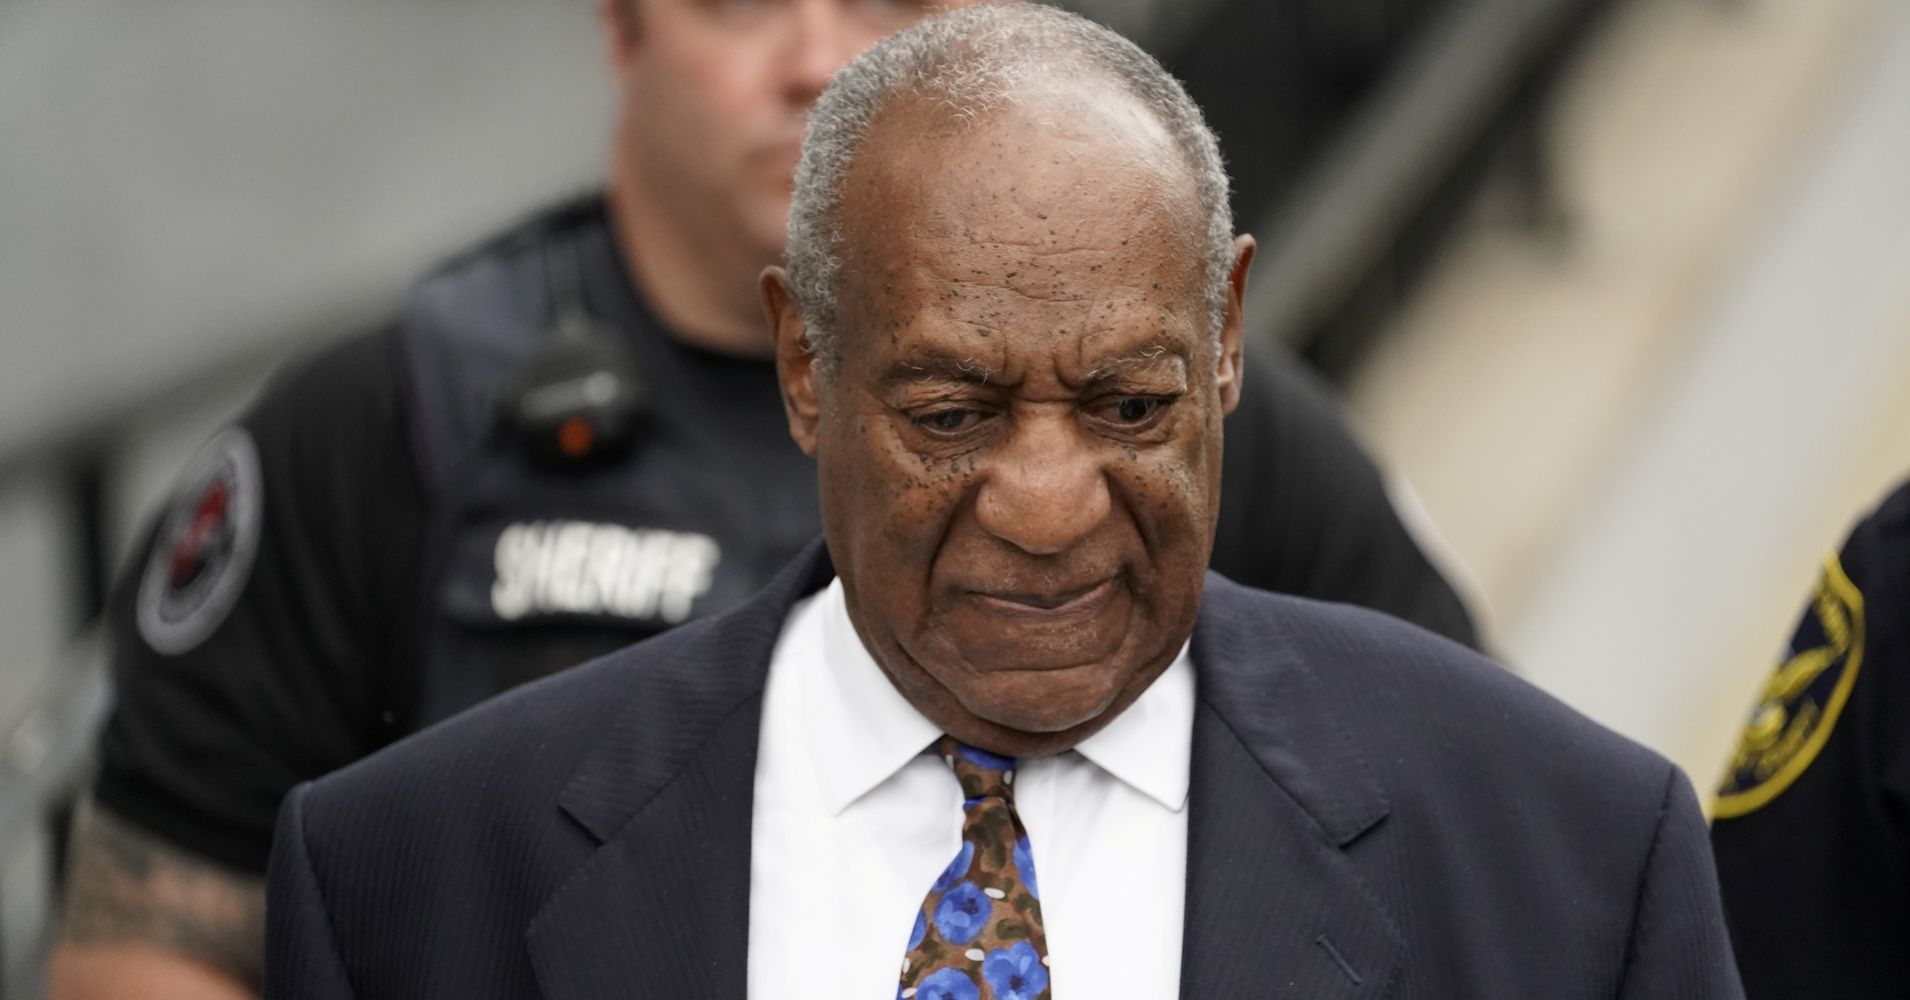 Bill Cosby Sentenced To 3 To 10 Years In Prison For Sexual Assault 5ba99b562500003200374d7c